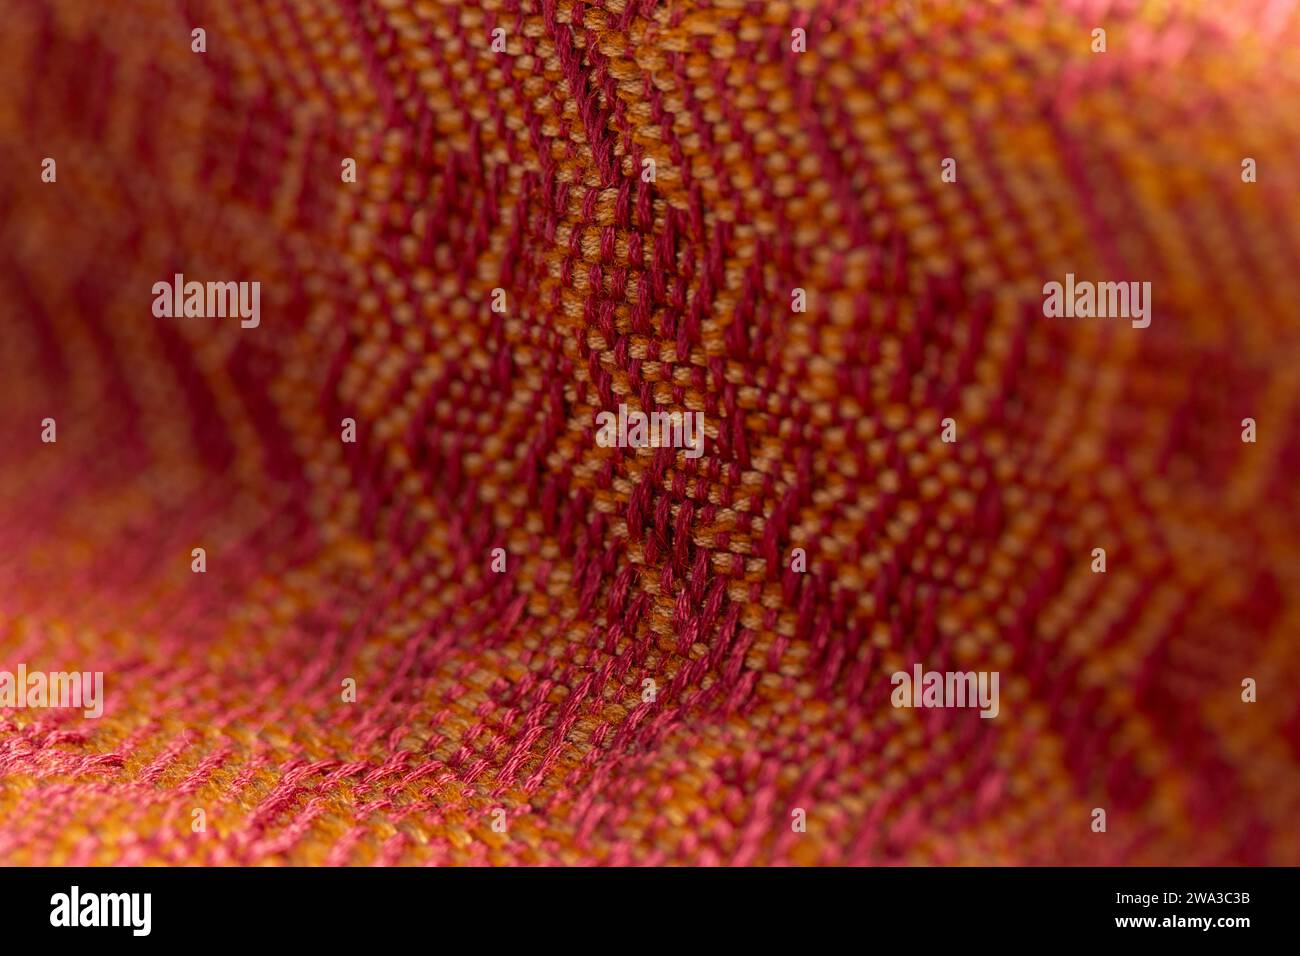 woven fabric of varied twill weaves in bright red and orange colors, detailed close up macro shot with a shallow depth of field Stock Photo